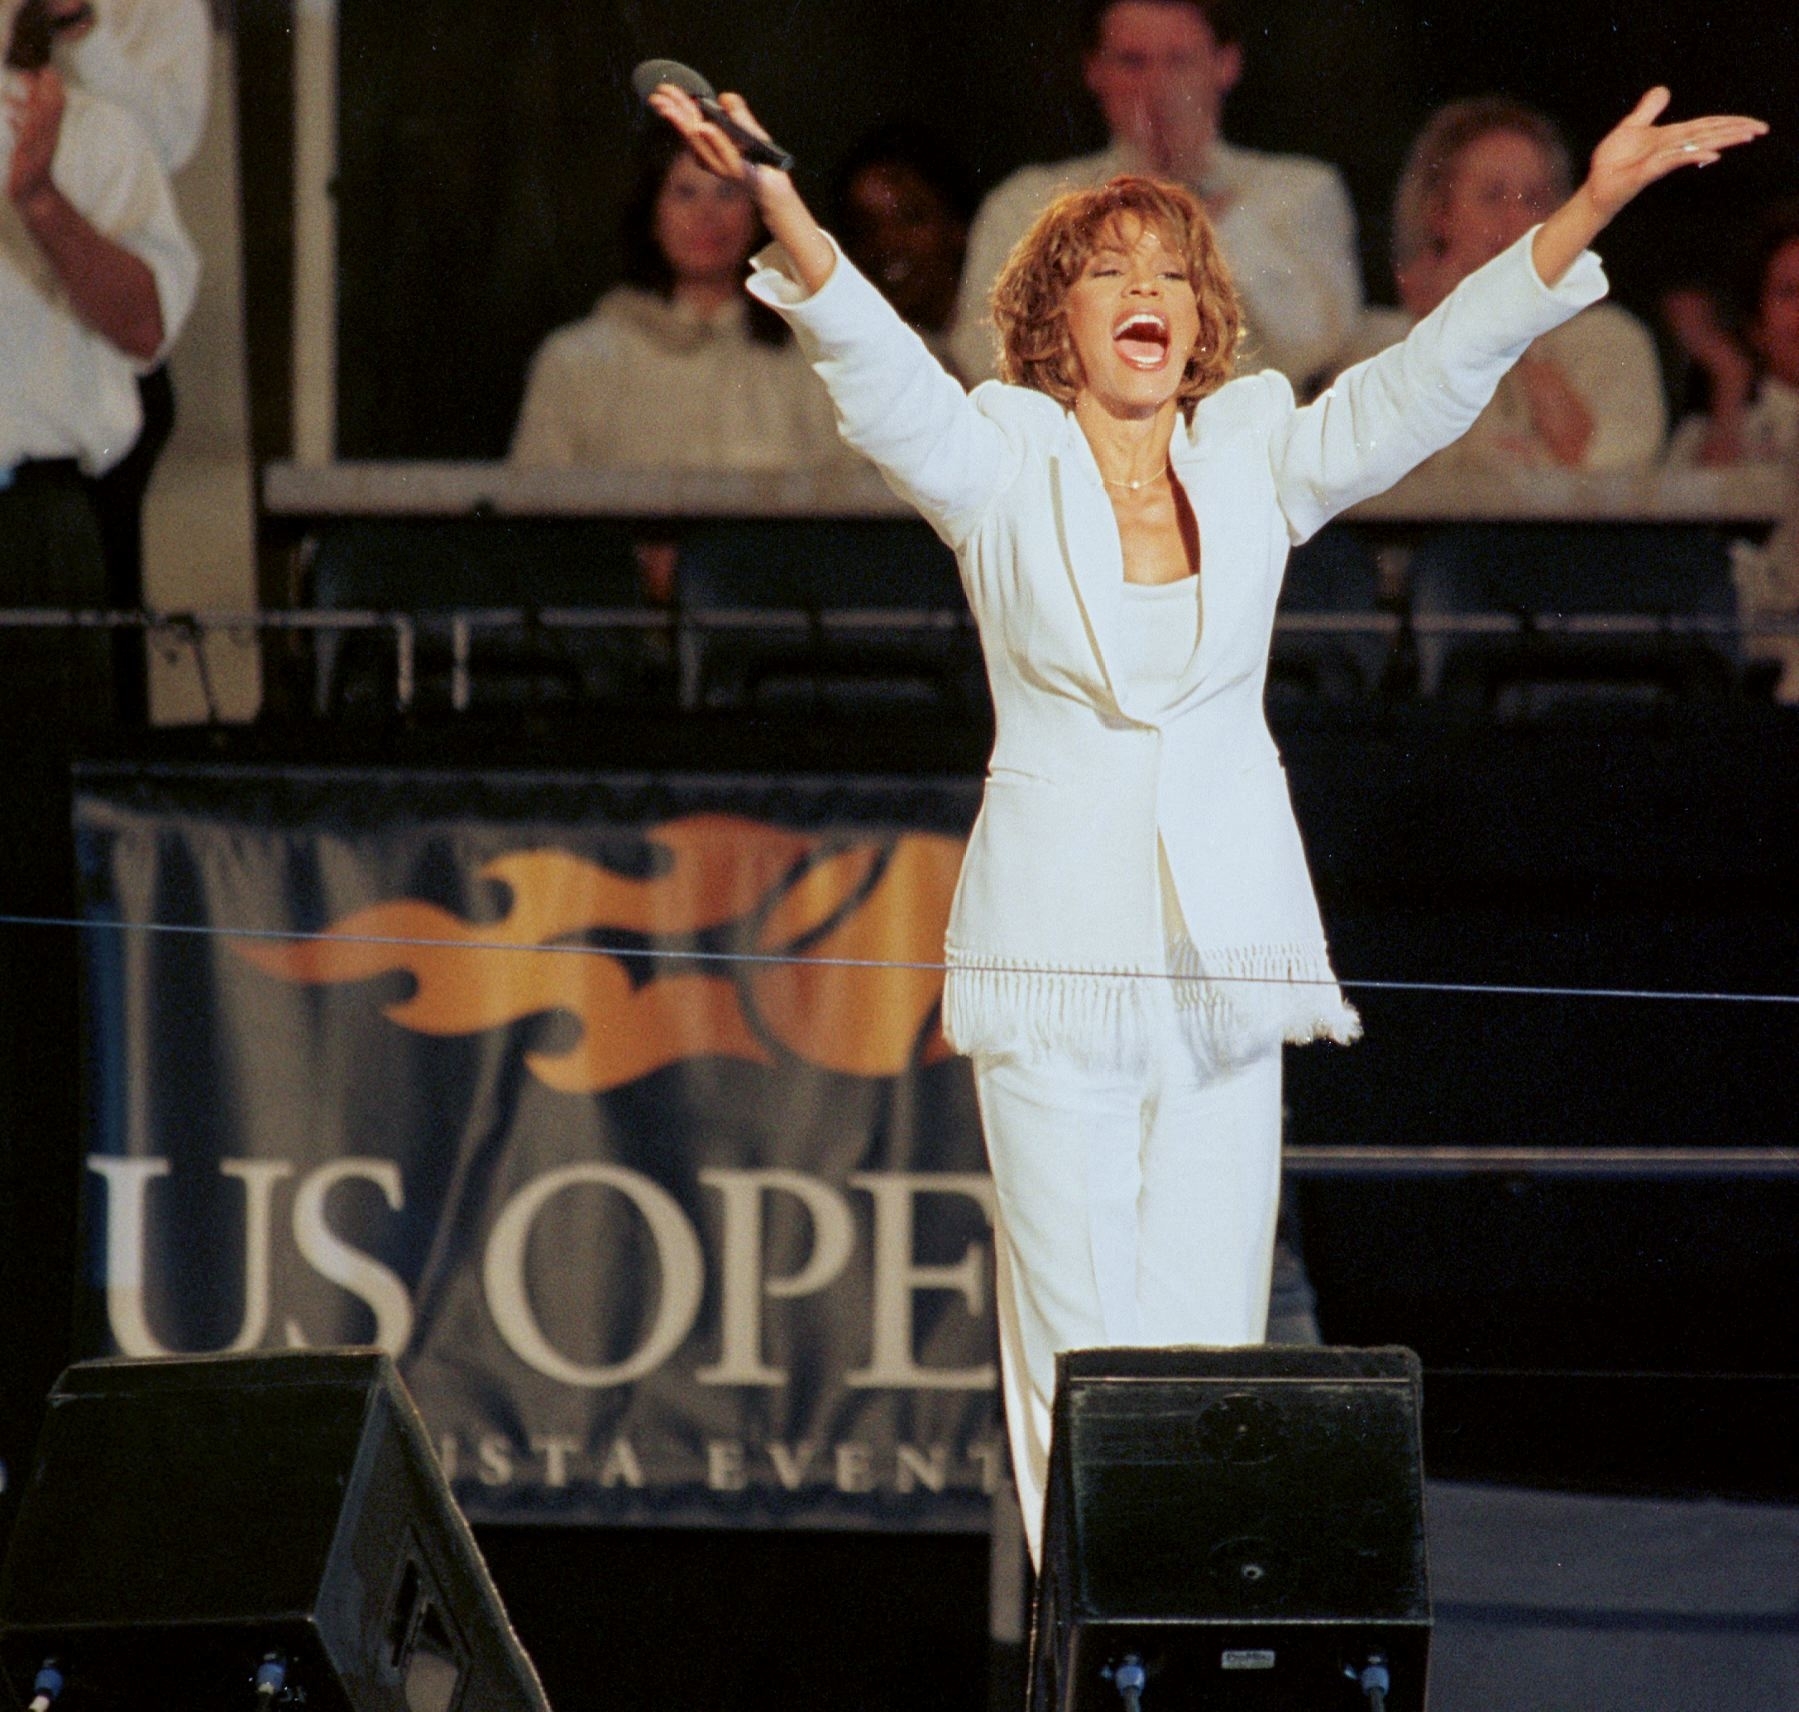 Whitney Houston stands onstage with her arms outstretched as she performs at the US Open